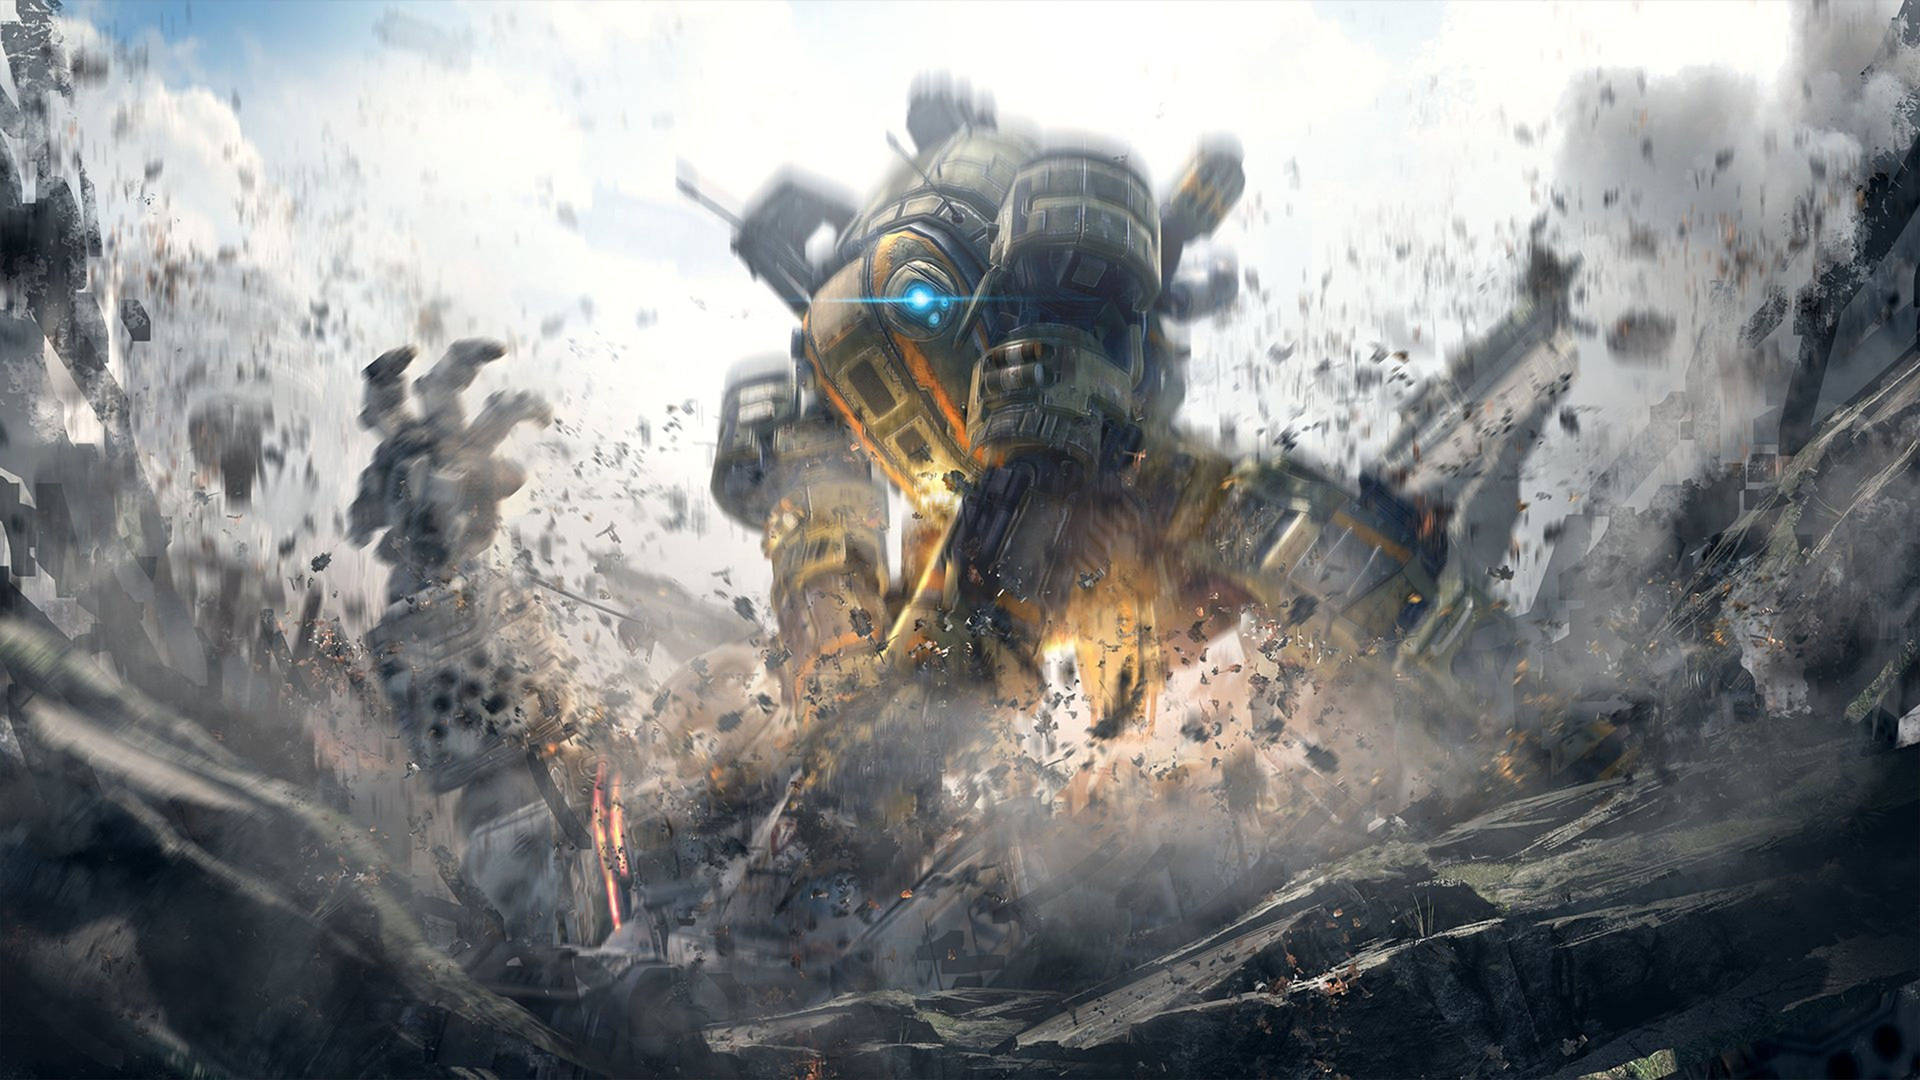 Two Titans take the fight to the Frontier in Titanfall 2 Wallpaper